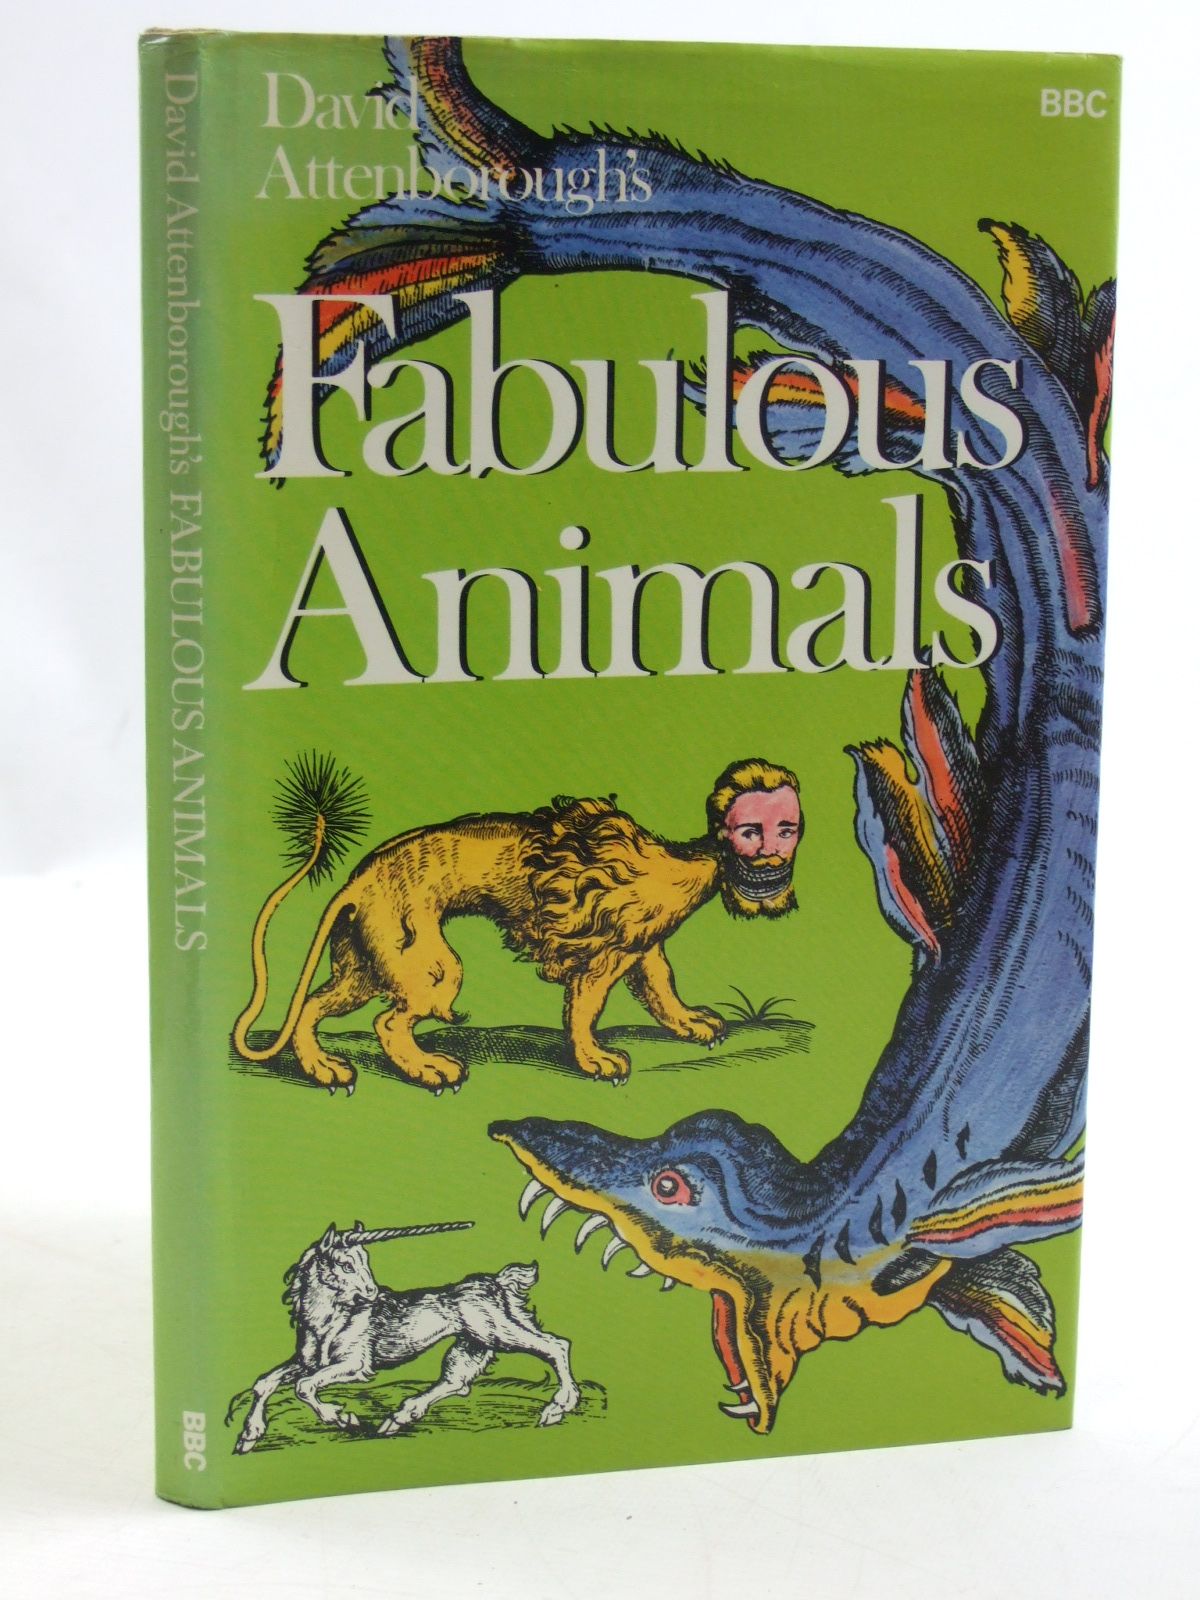 Fabulous Animals with David Attenborough written by Molly Cox